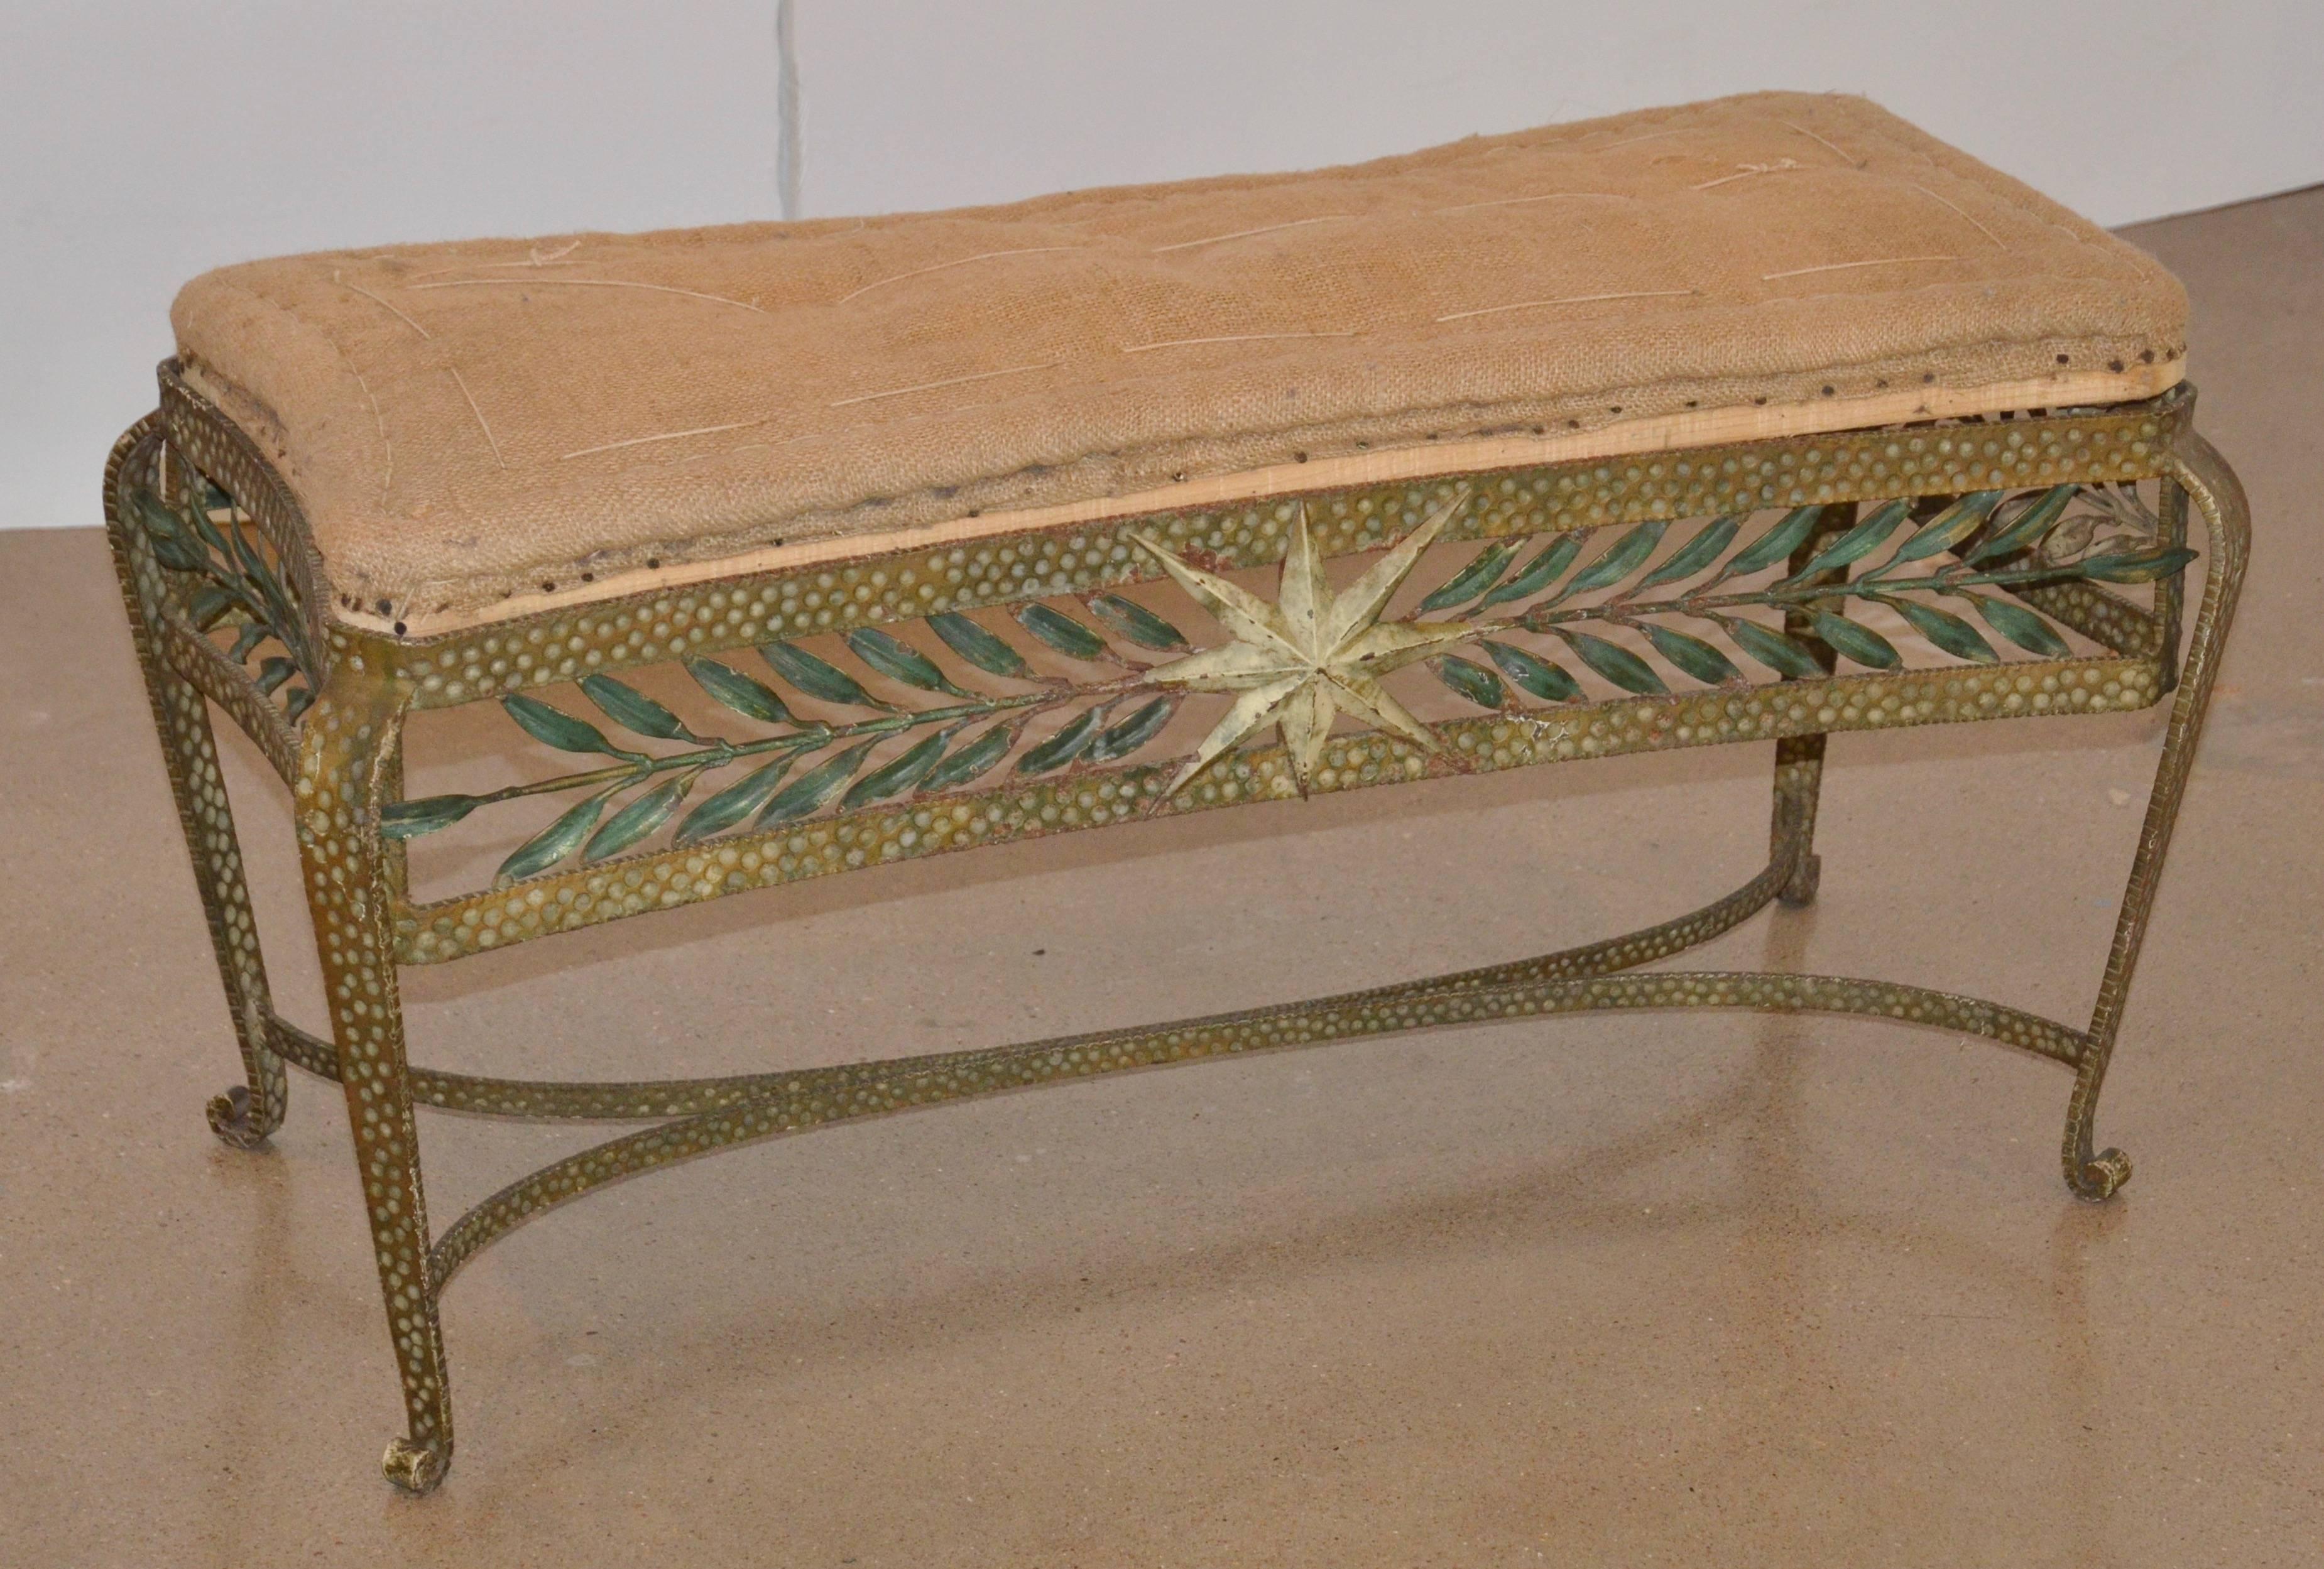 Forged and Gilt Bench, Pierluigi Colli for Cristal Art, Italy, 1950 1